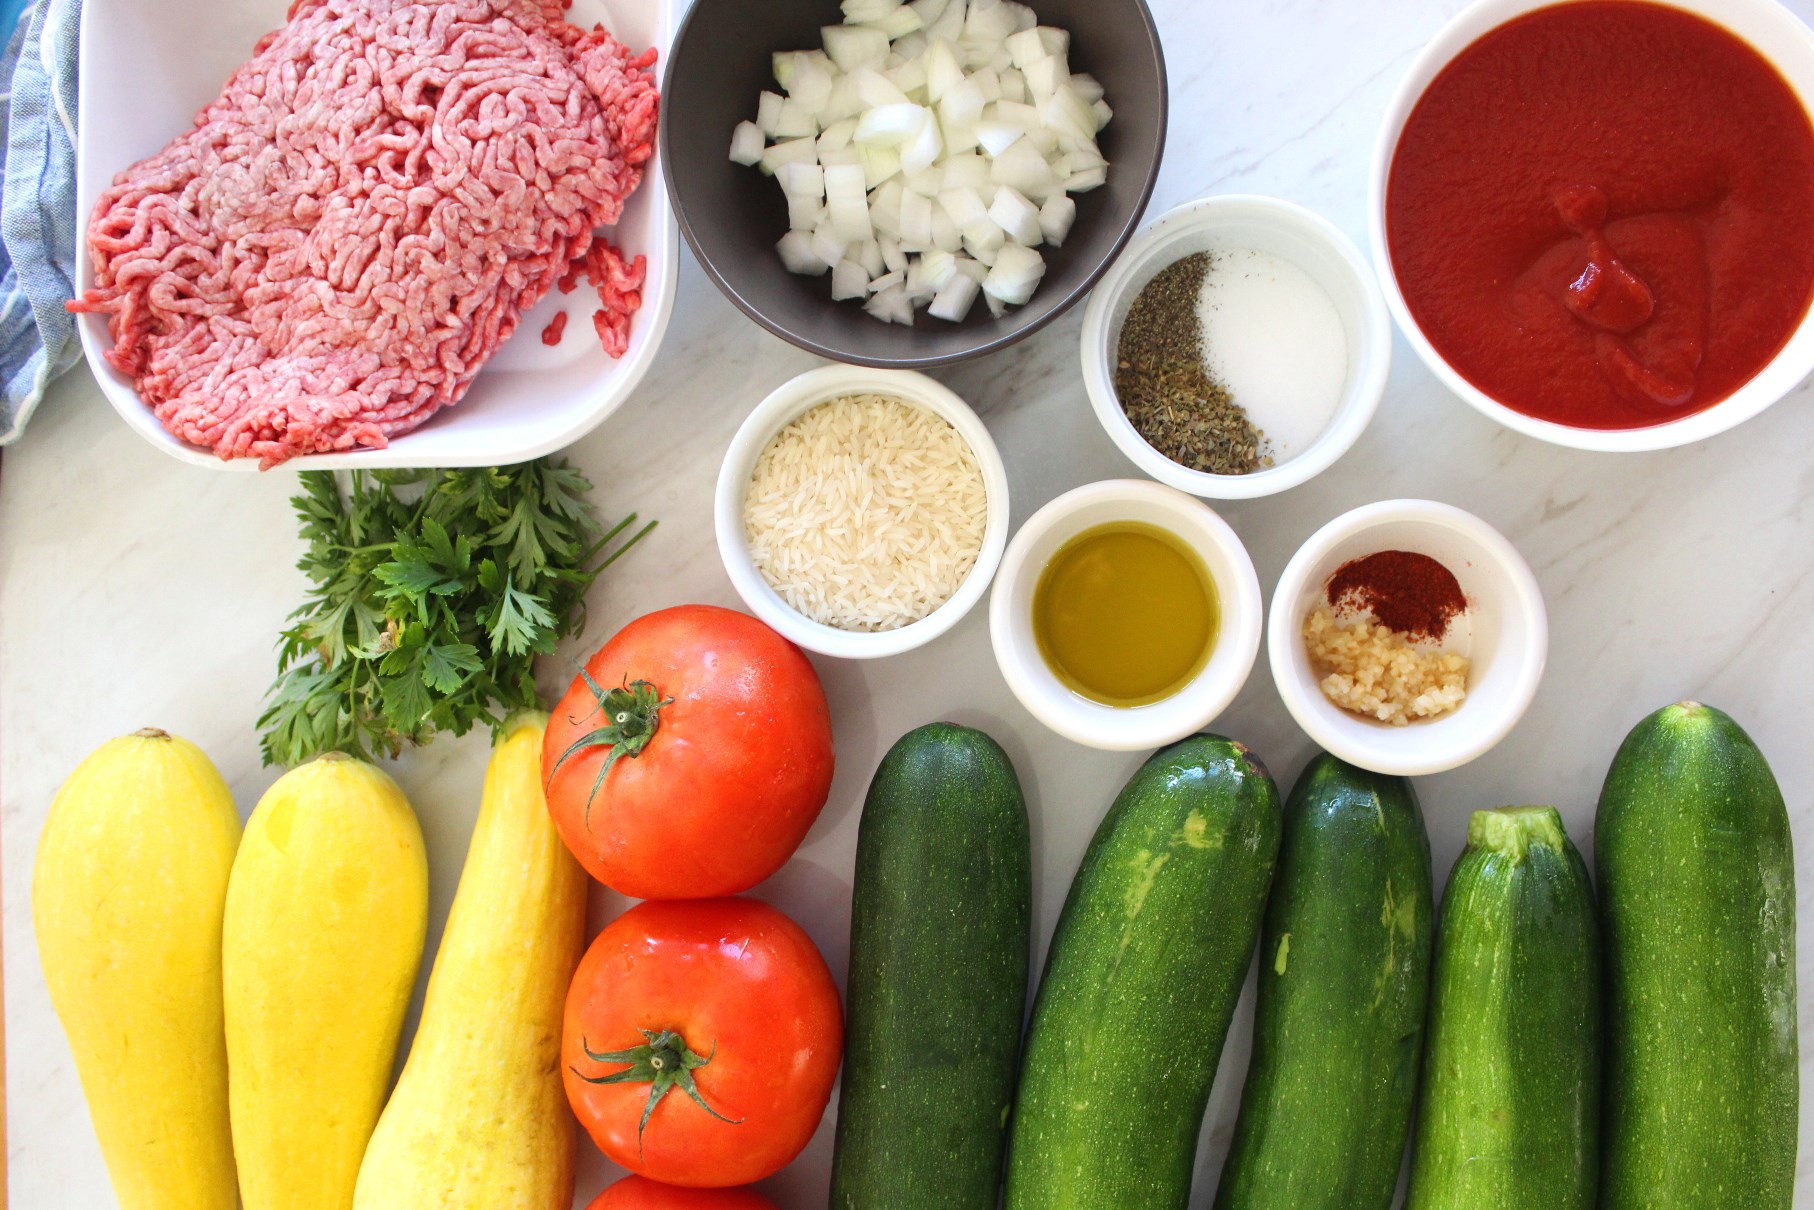 Picture shows most of the ingredients used for the Mediterranean baked stuffed zucchini casserole. You can see zuchinis, squash, tomatoes, tomato sauce, onions, spices, rice, oil, and ground beef. 